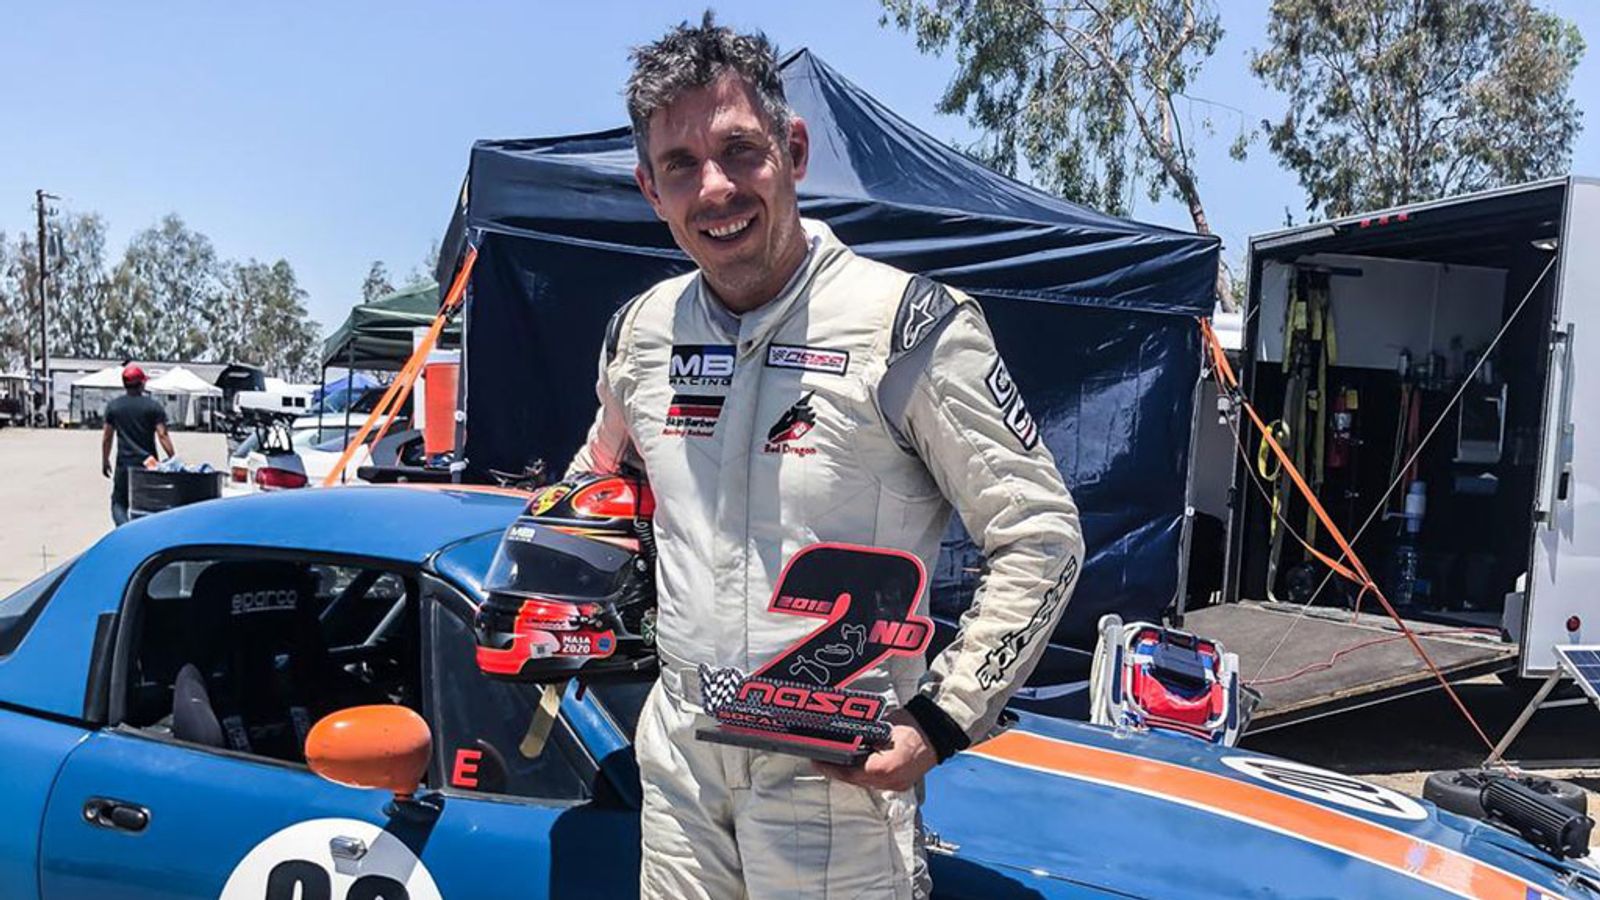 Mick Blue Places 2nd in Racing Event at Buttonwillow Raceway Park